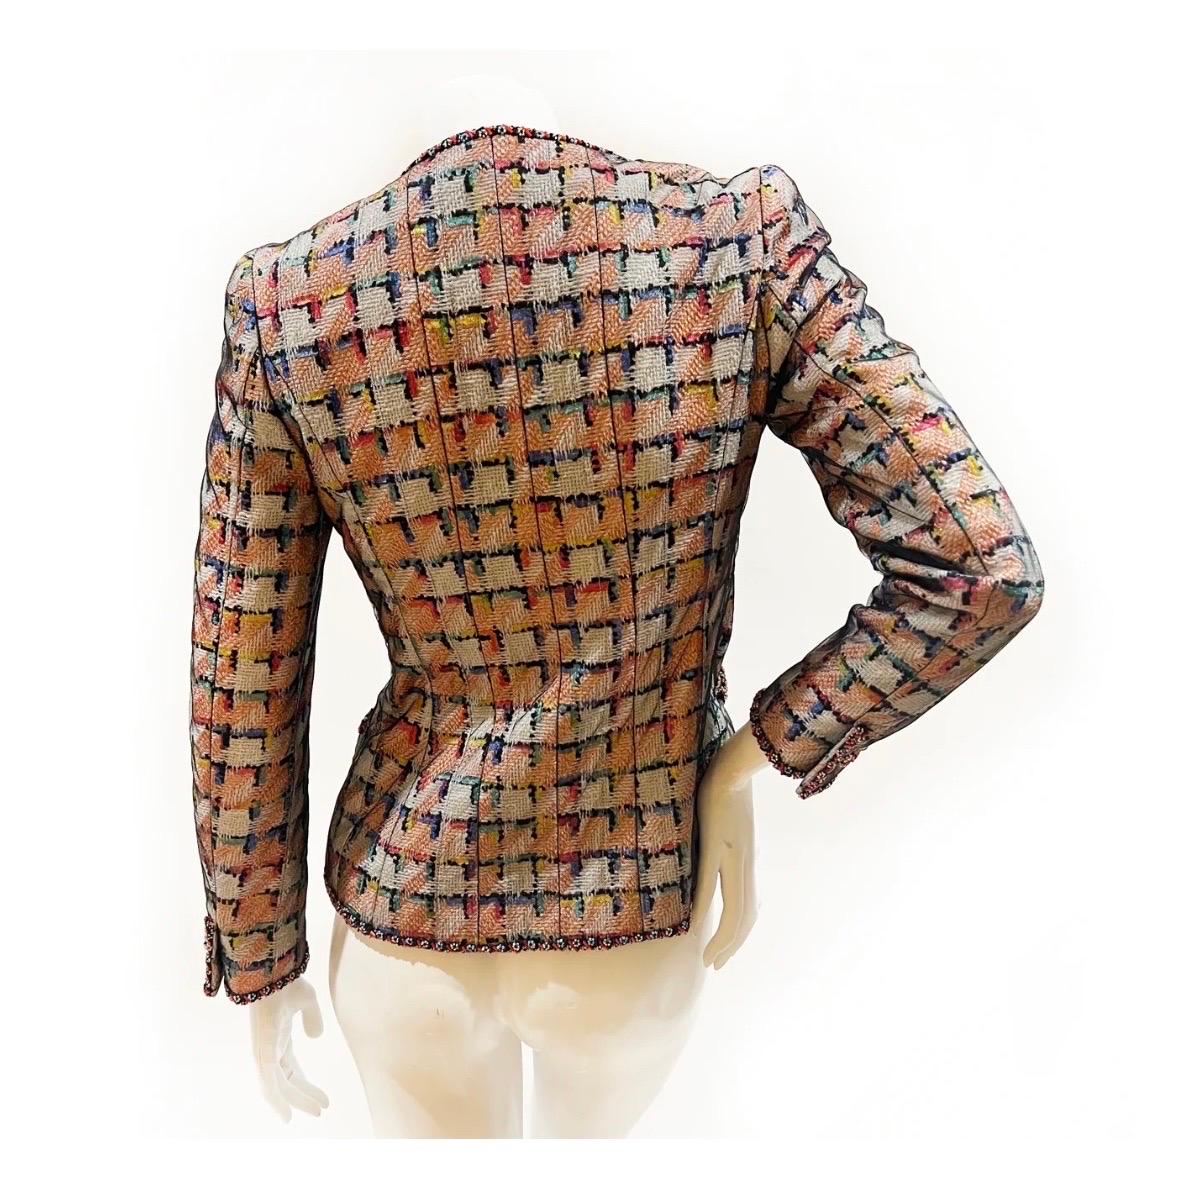 Multicolor Beaded trim jacket by Chanel
Cruise 1998 collection
Made in France
Multicolor houndstooth throughout
Top layer of black transparent mesh 
Colorful beaded flower trim 
Double chain-button front closure 
Double breast and waist